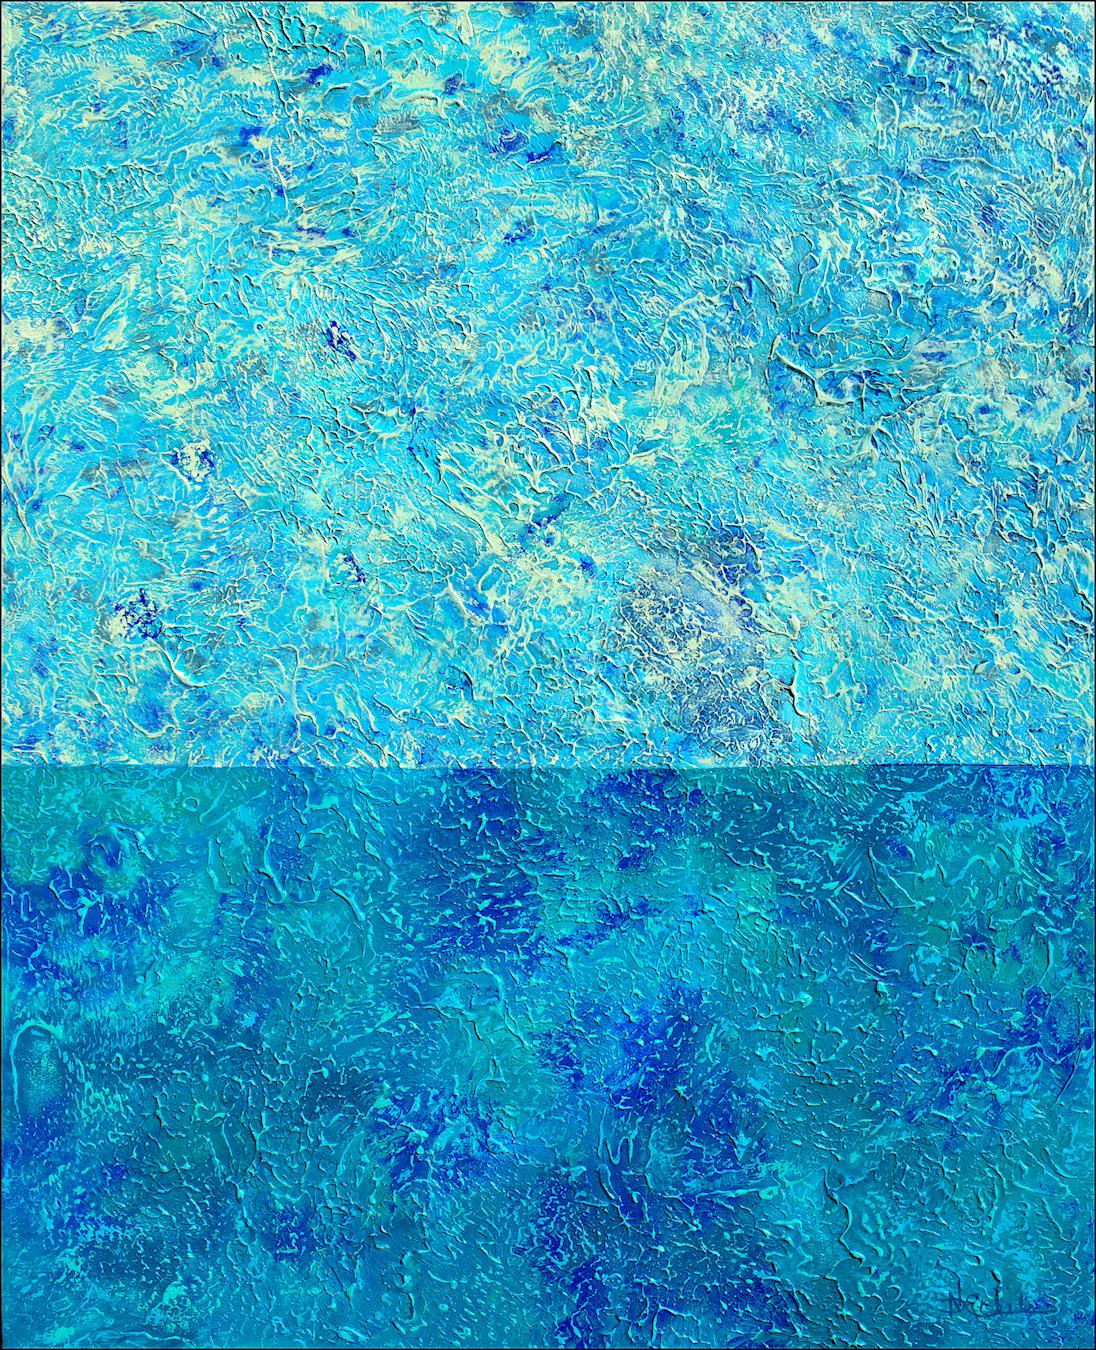 Nancy Eckels Abstract Painting - "A Serenely Quiet Sea" Mixed Media abstract with textural blues, teal, turquoise